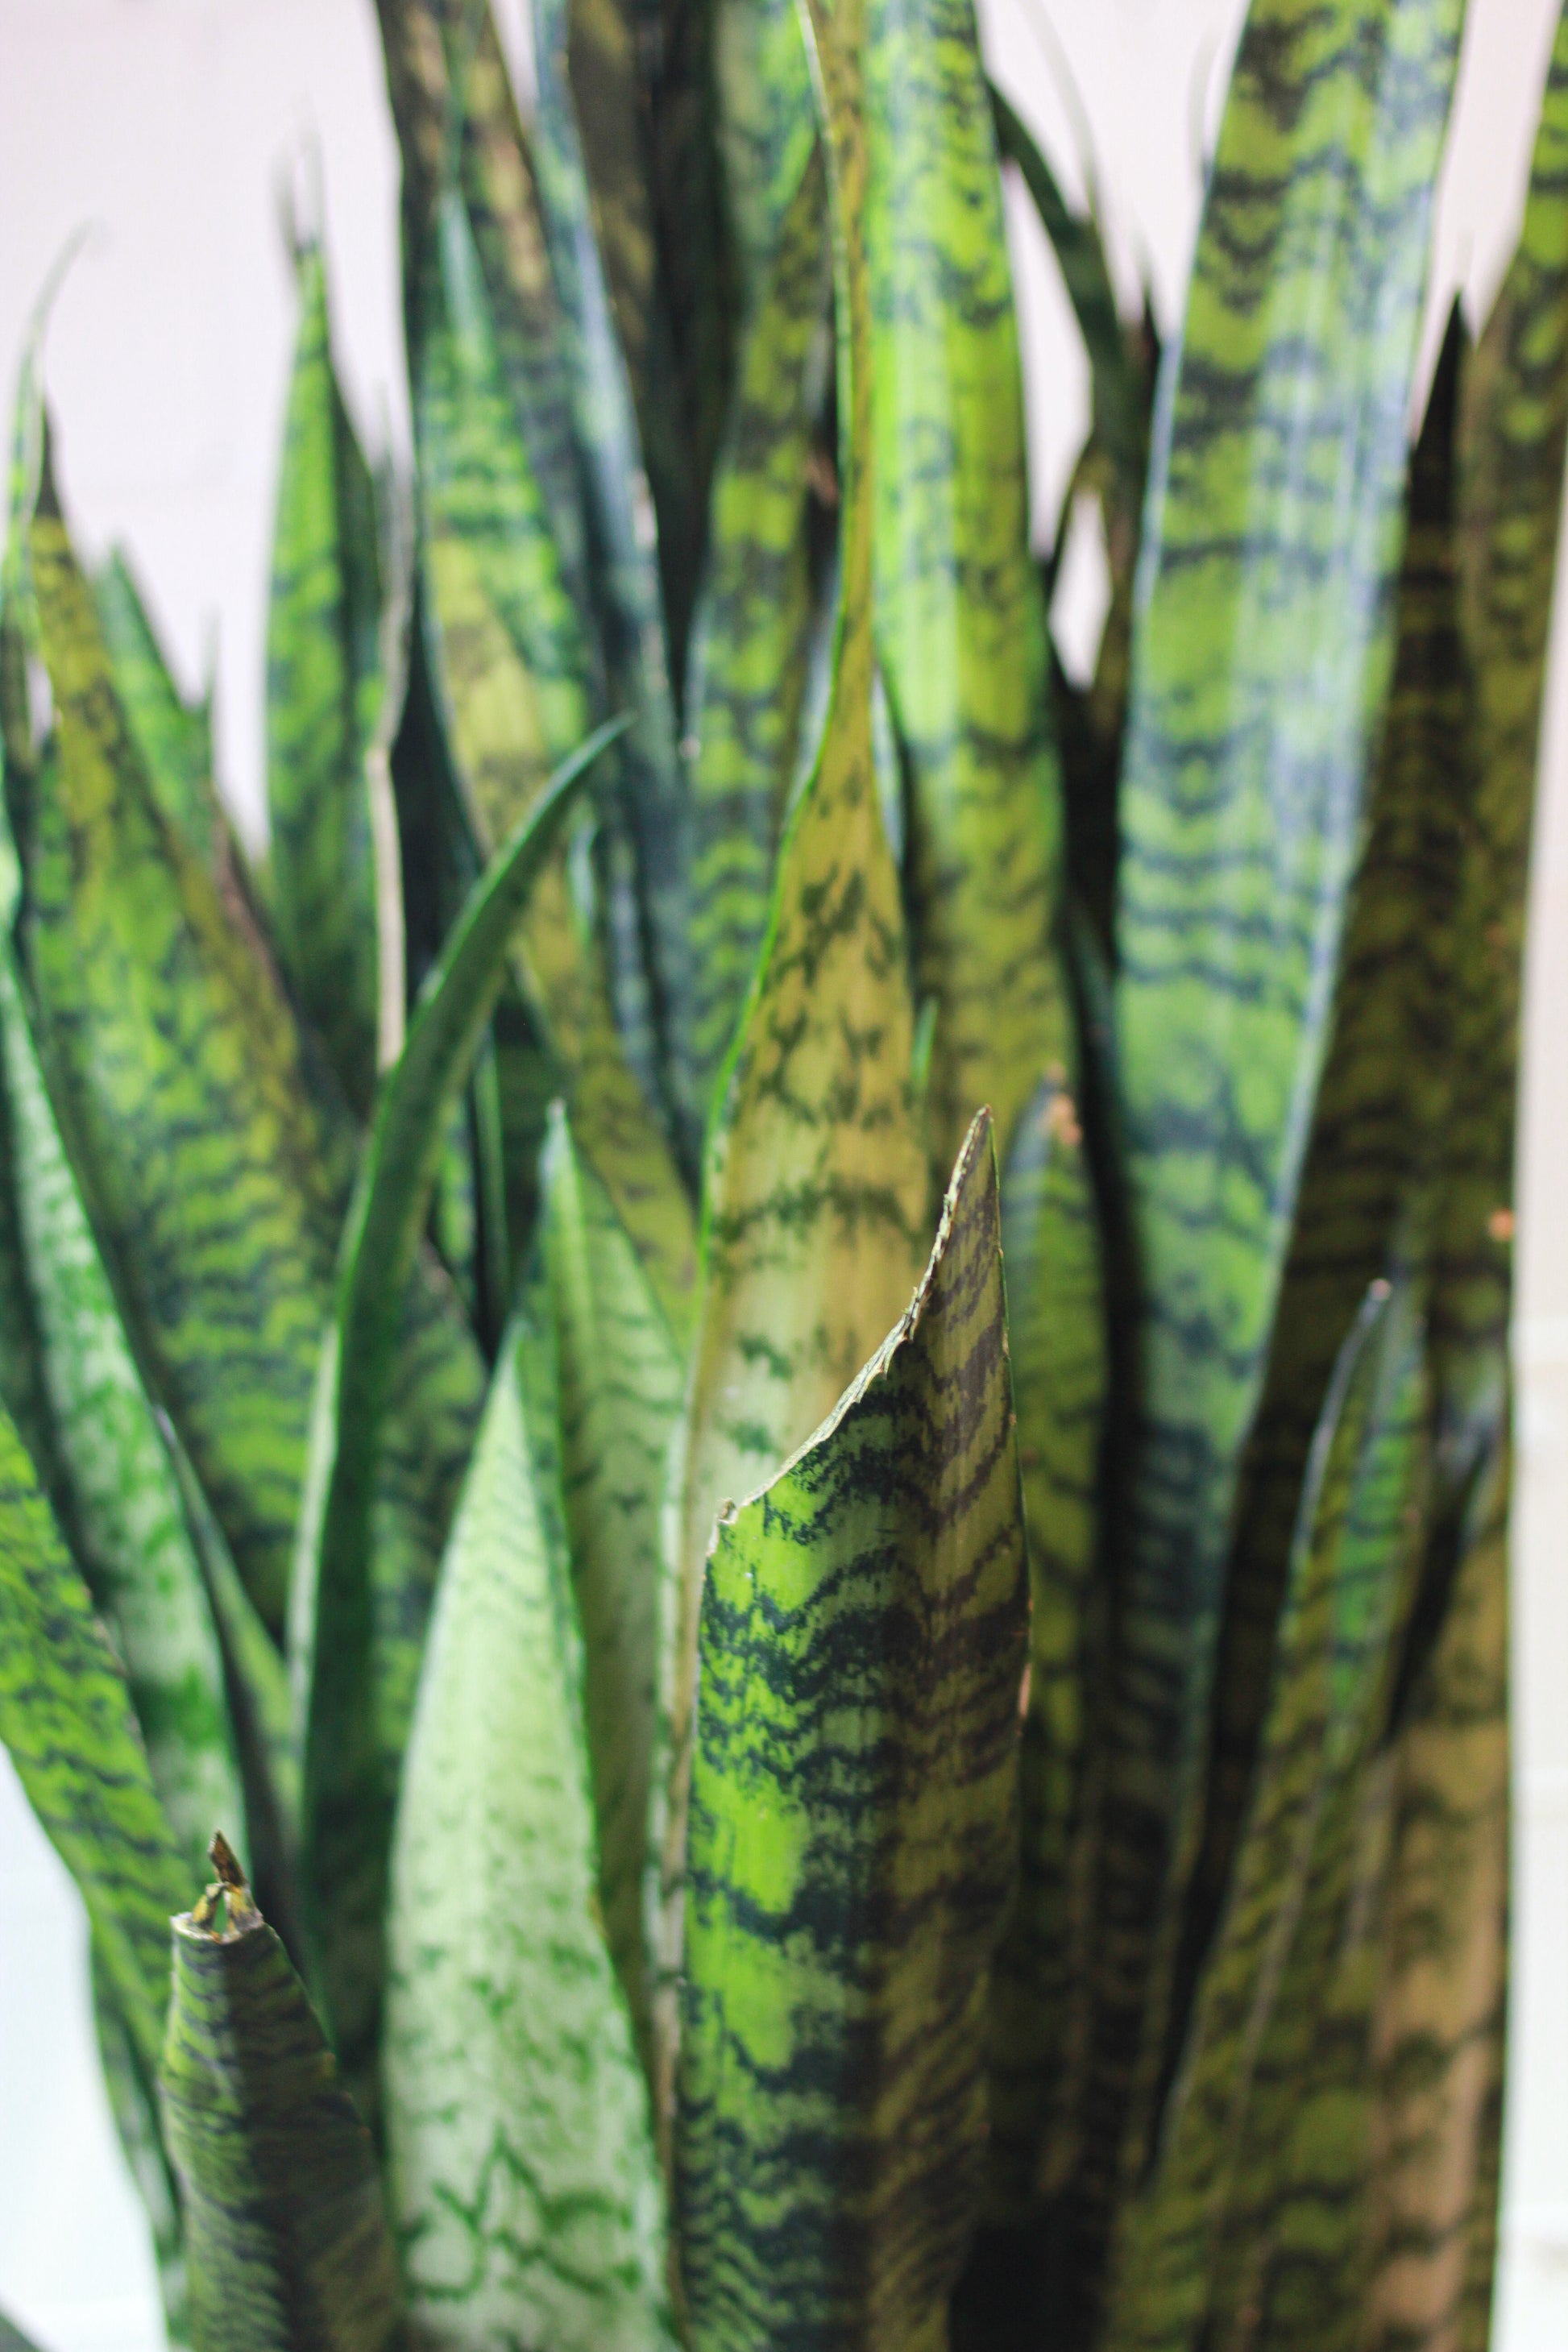 Green Snake Plant (Sansevieria trifasciata 'Zeylanica') in a 14 inch pot. Indoor plant for sale by Promise Supply for delivery and pickup in Toronto